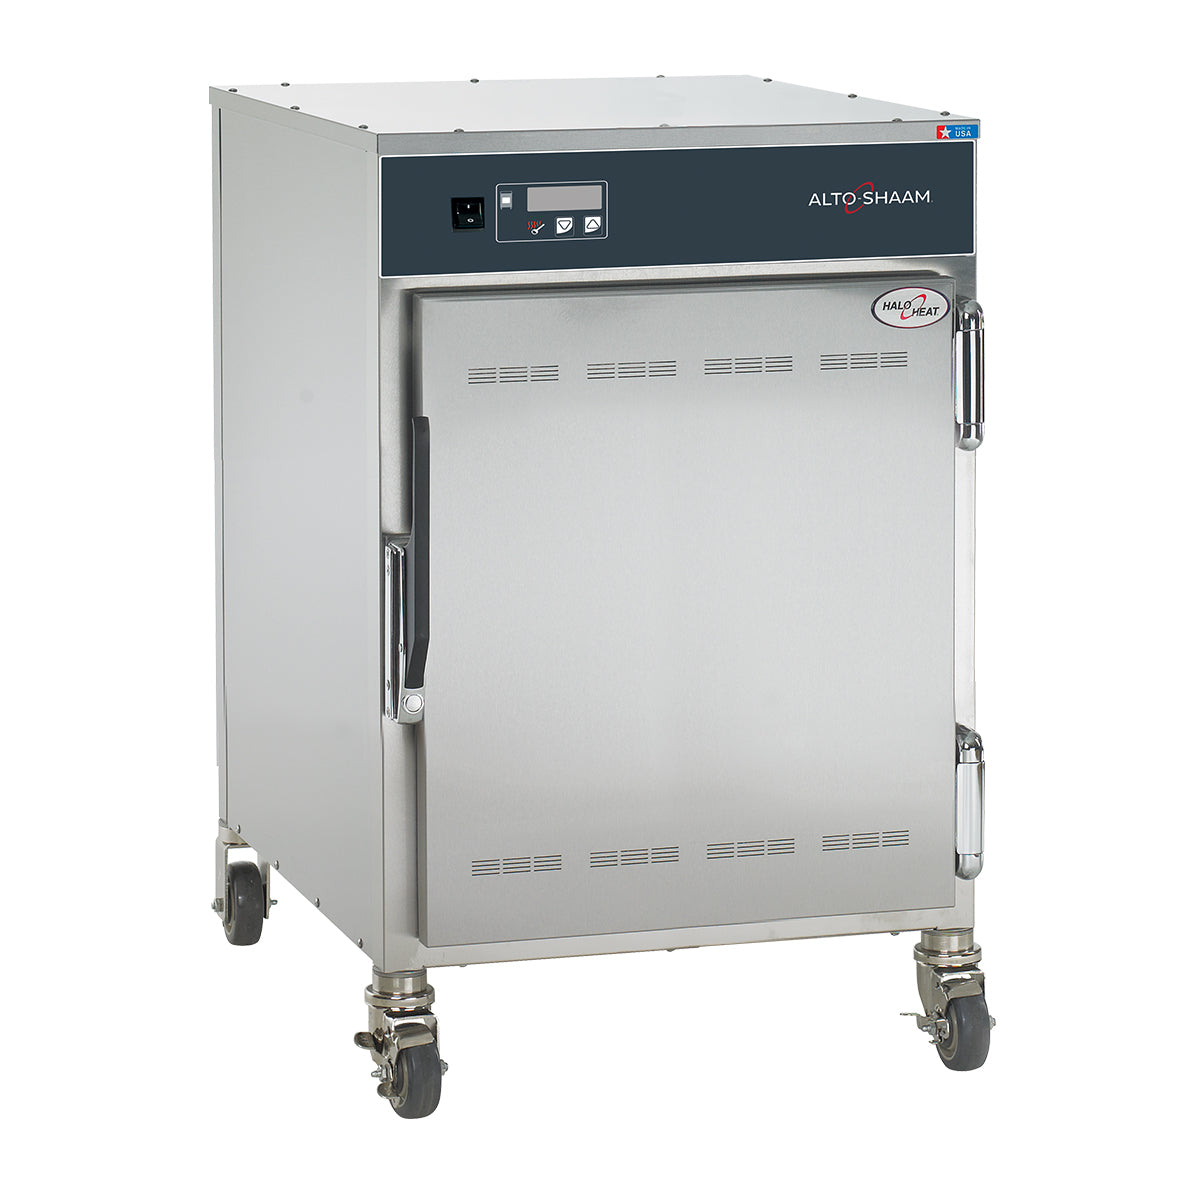 Alto-Shaam 750-S Hot Holding Cabinet 45kg